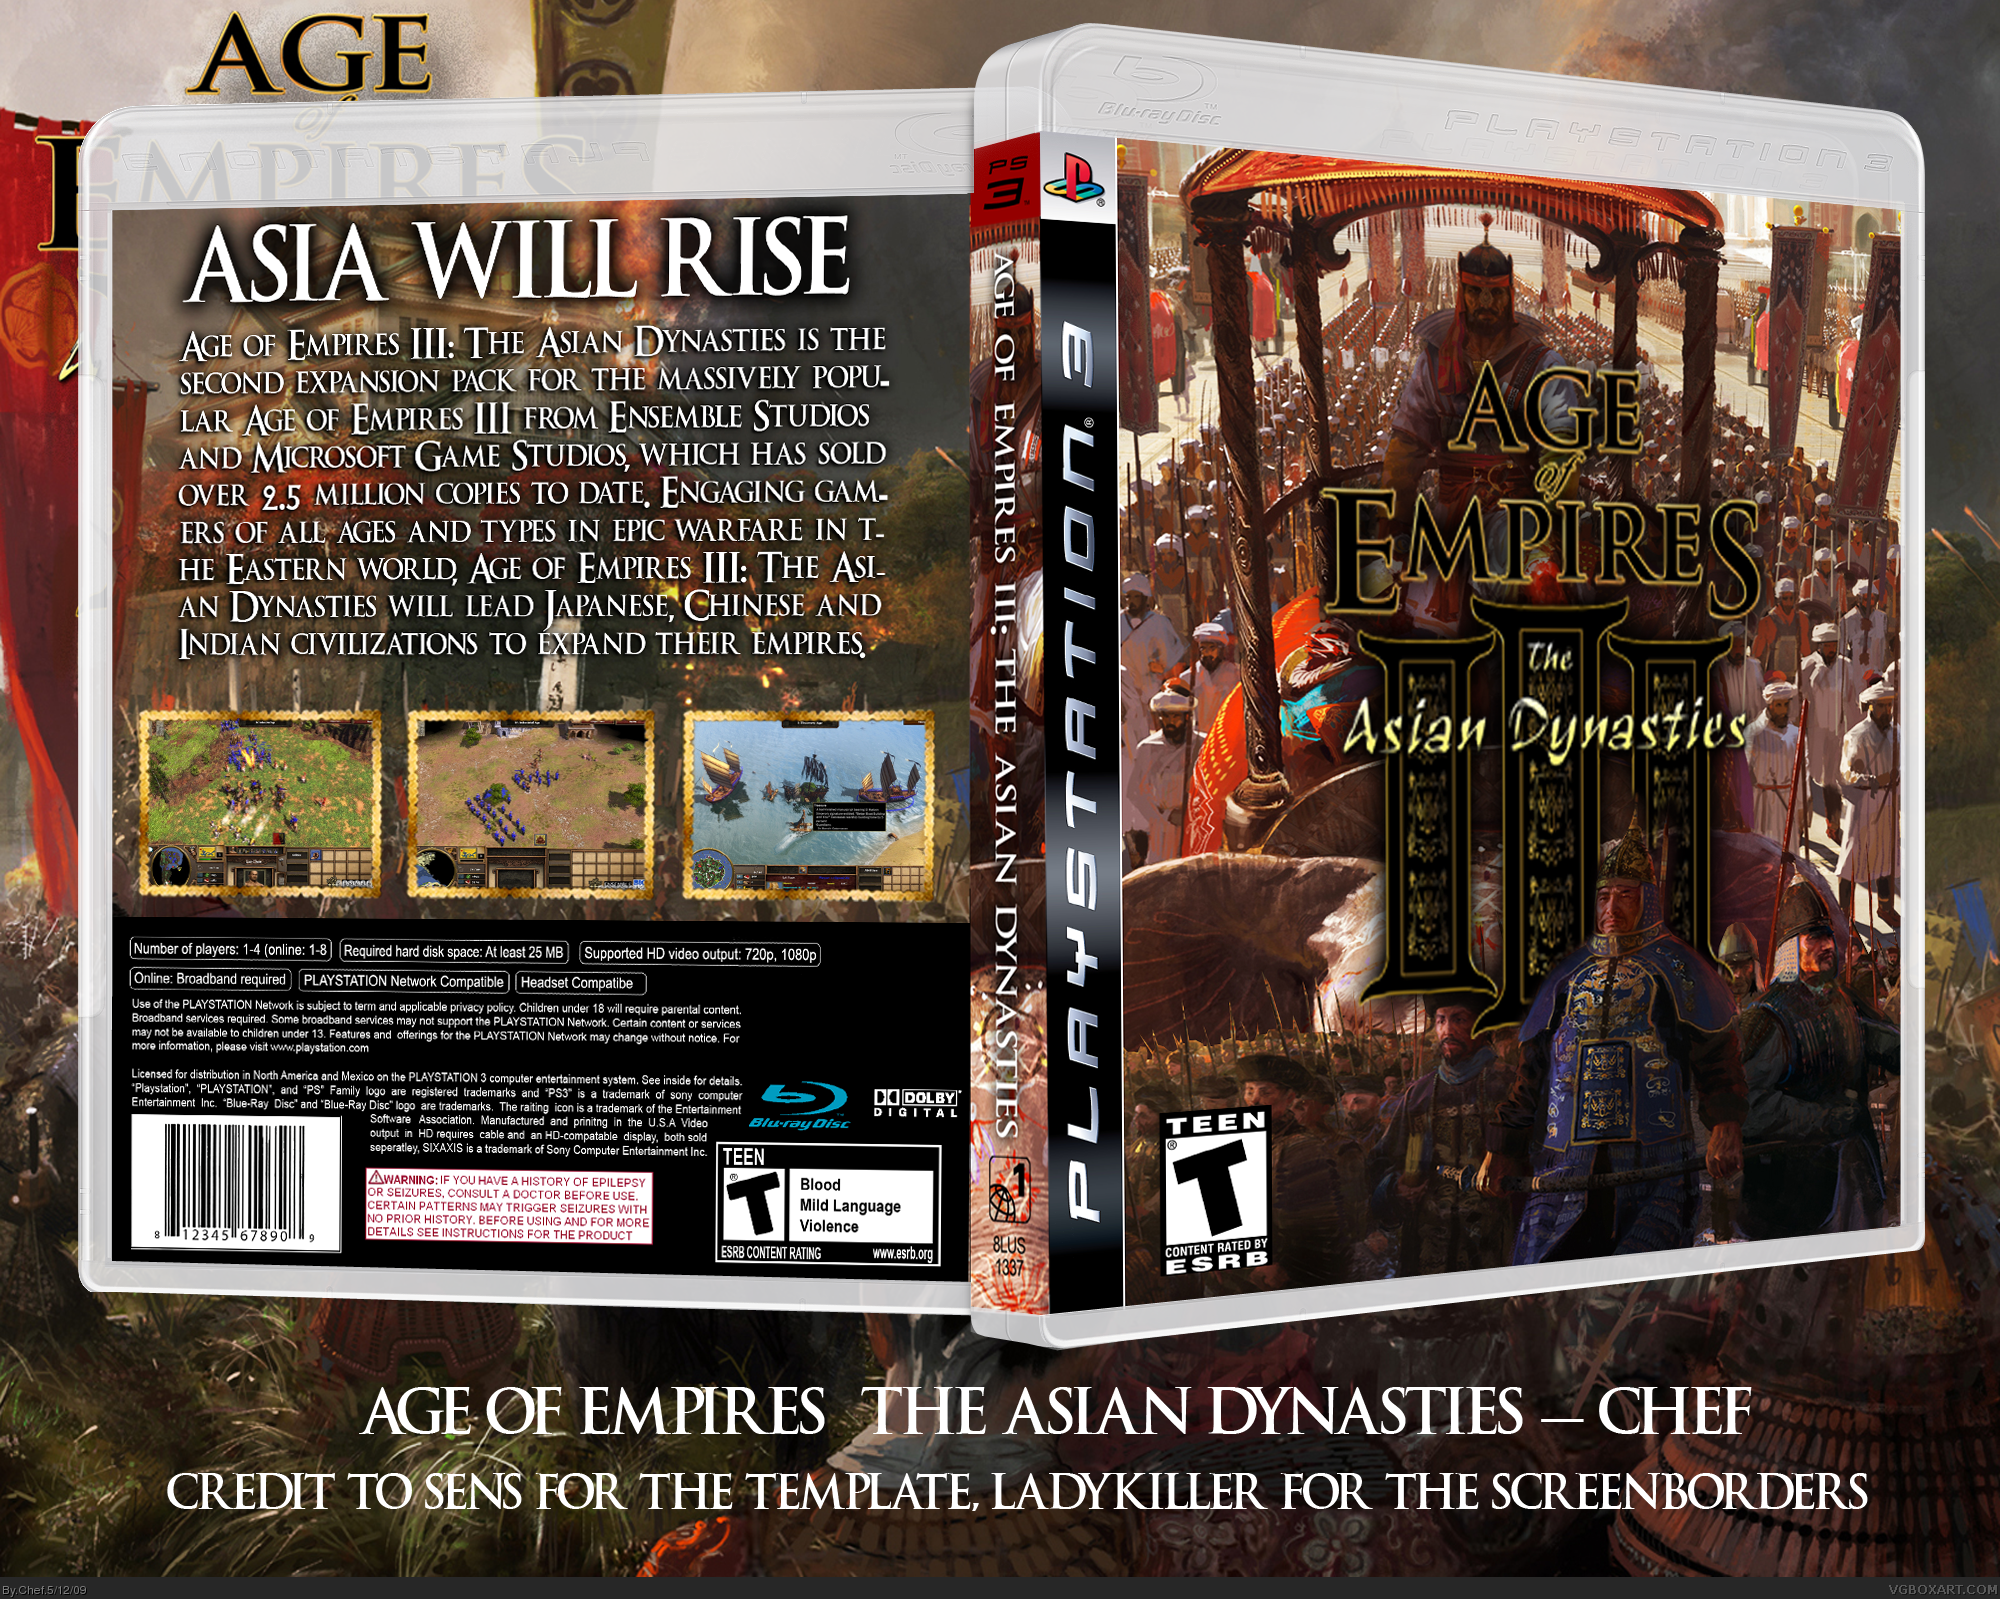 Age of Empires: The Asian Dynasties box cover